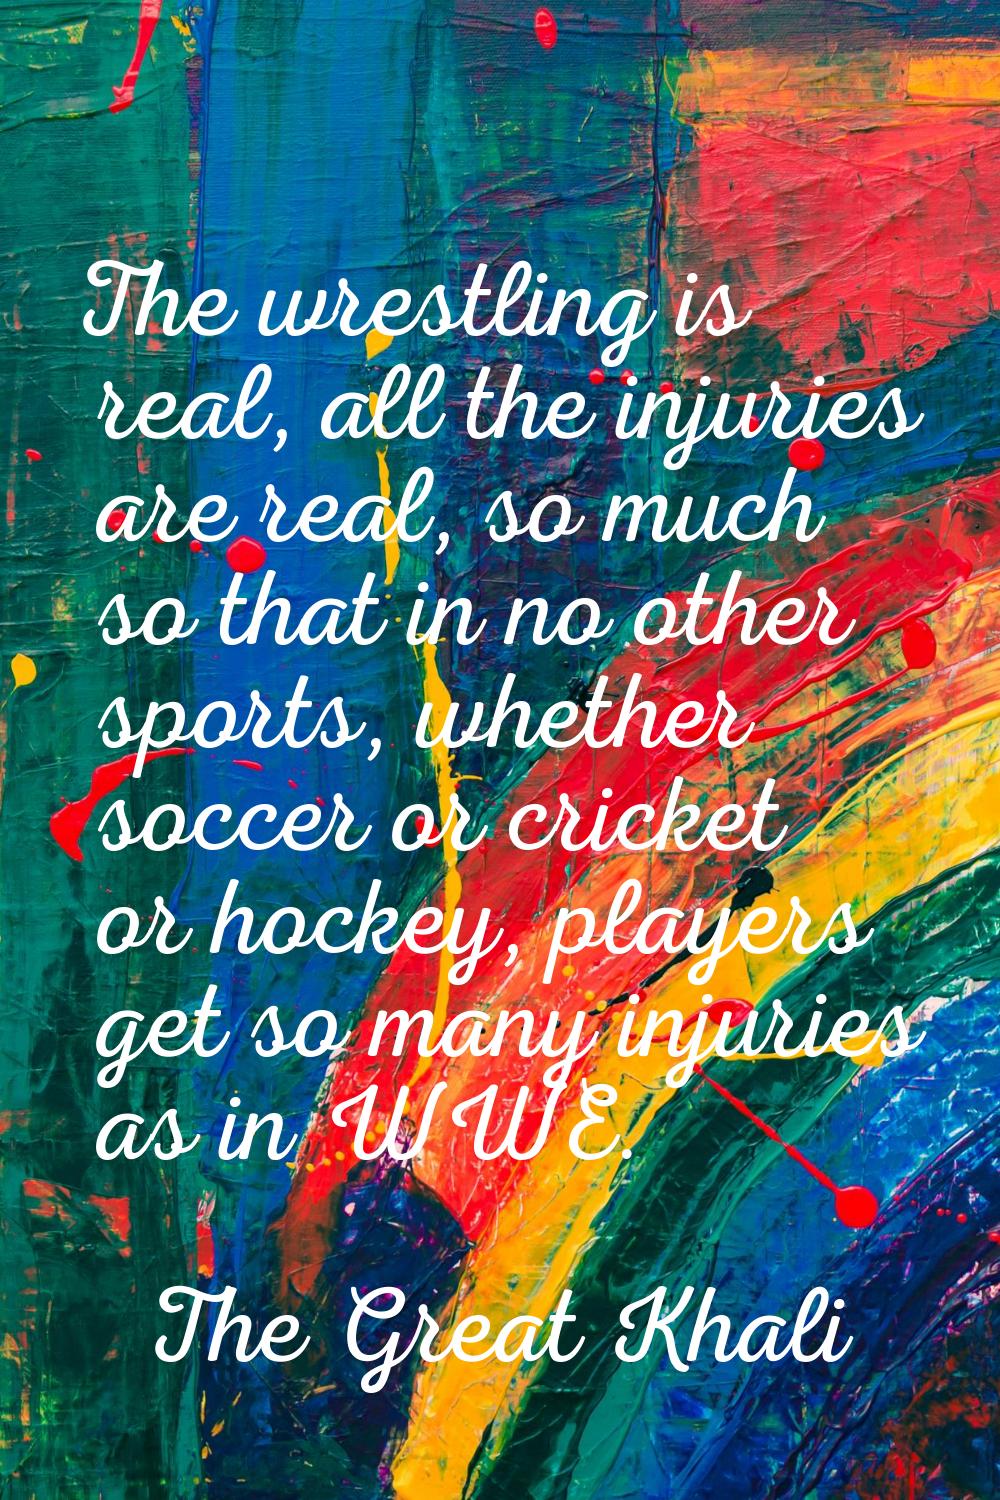 The wrestling is real, all the injuries are real, so much so that in no other sports, whether socce